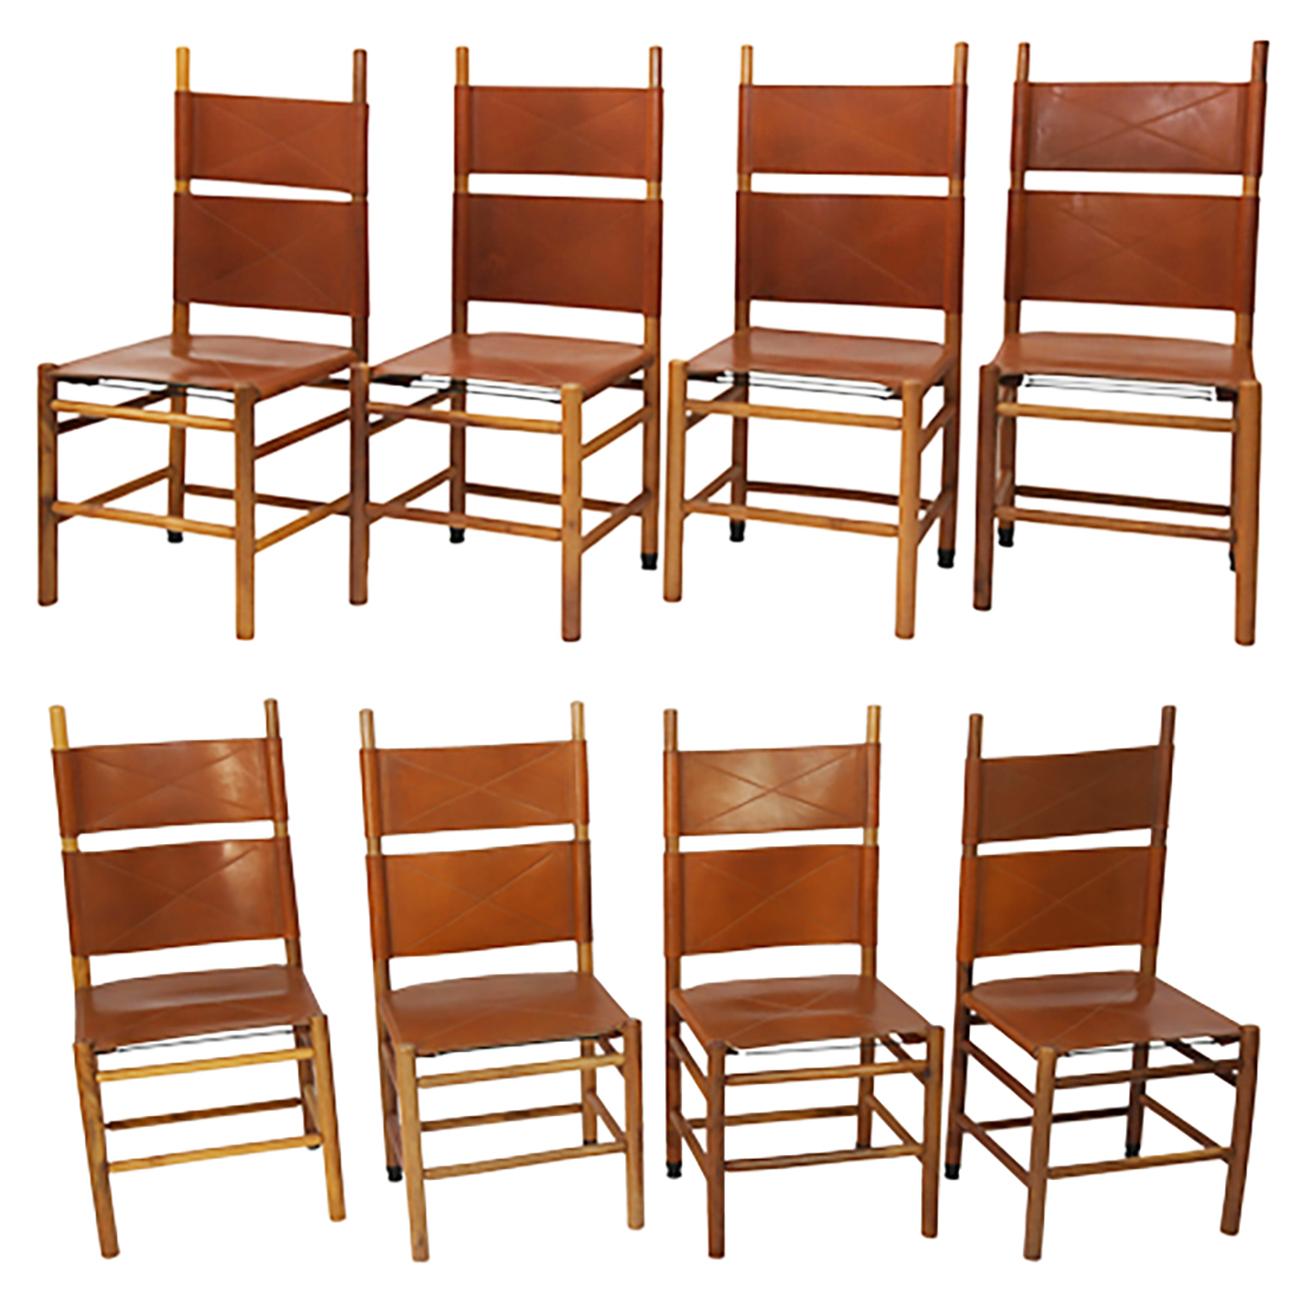 Set of Eight Kentucky Chairs by Carlo Scarpa for Bernini